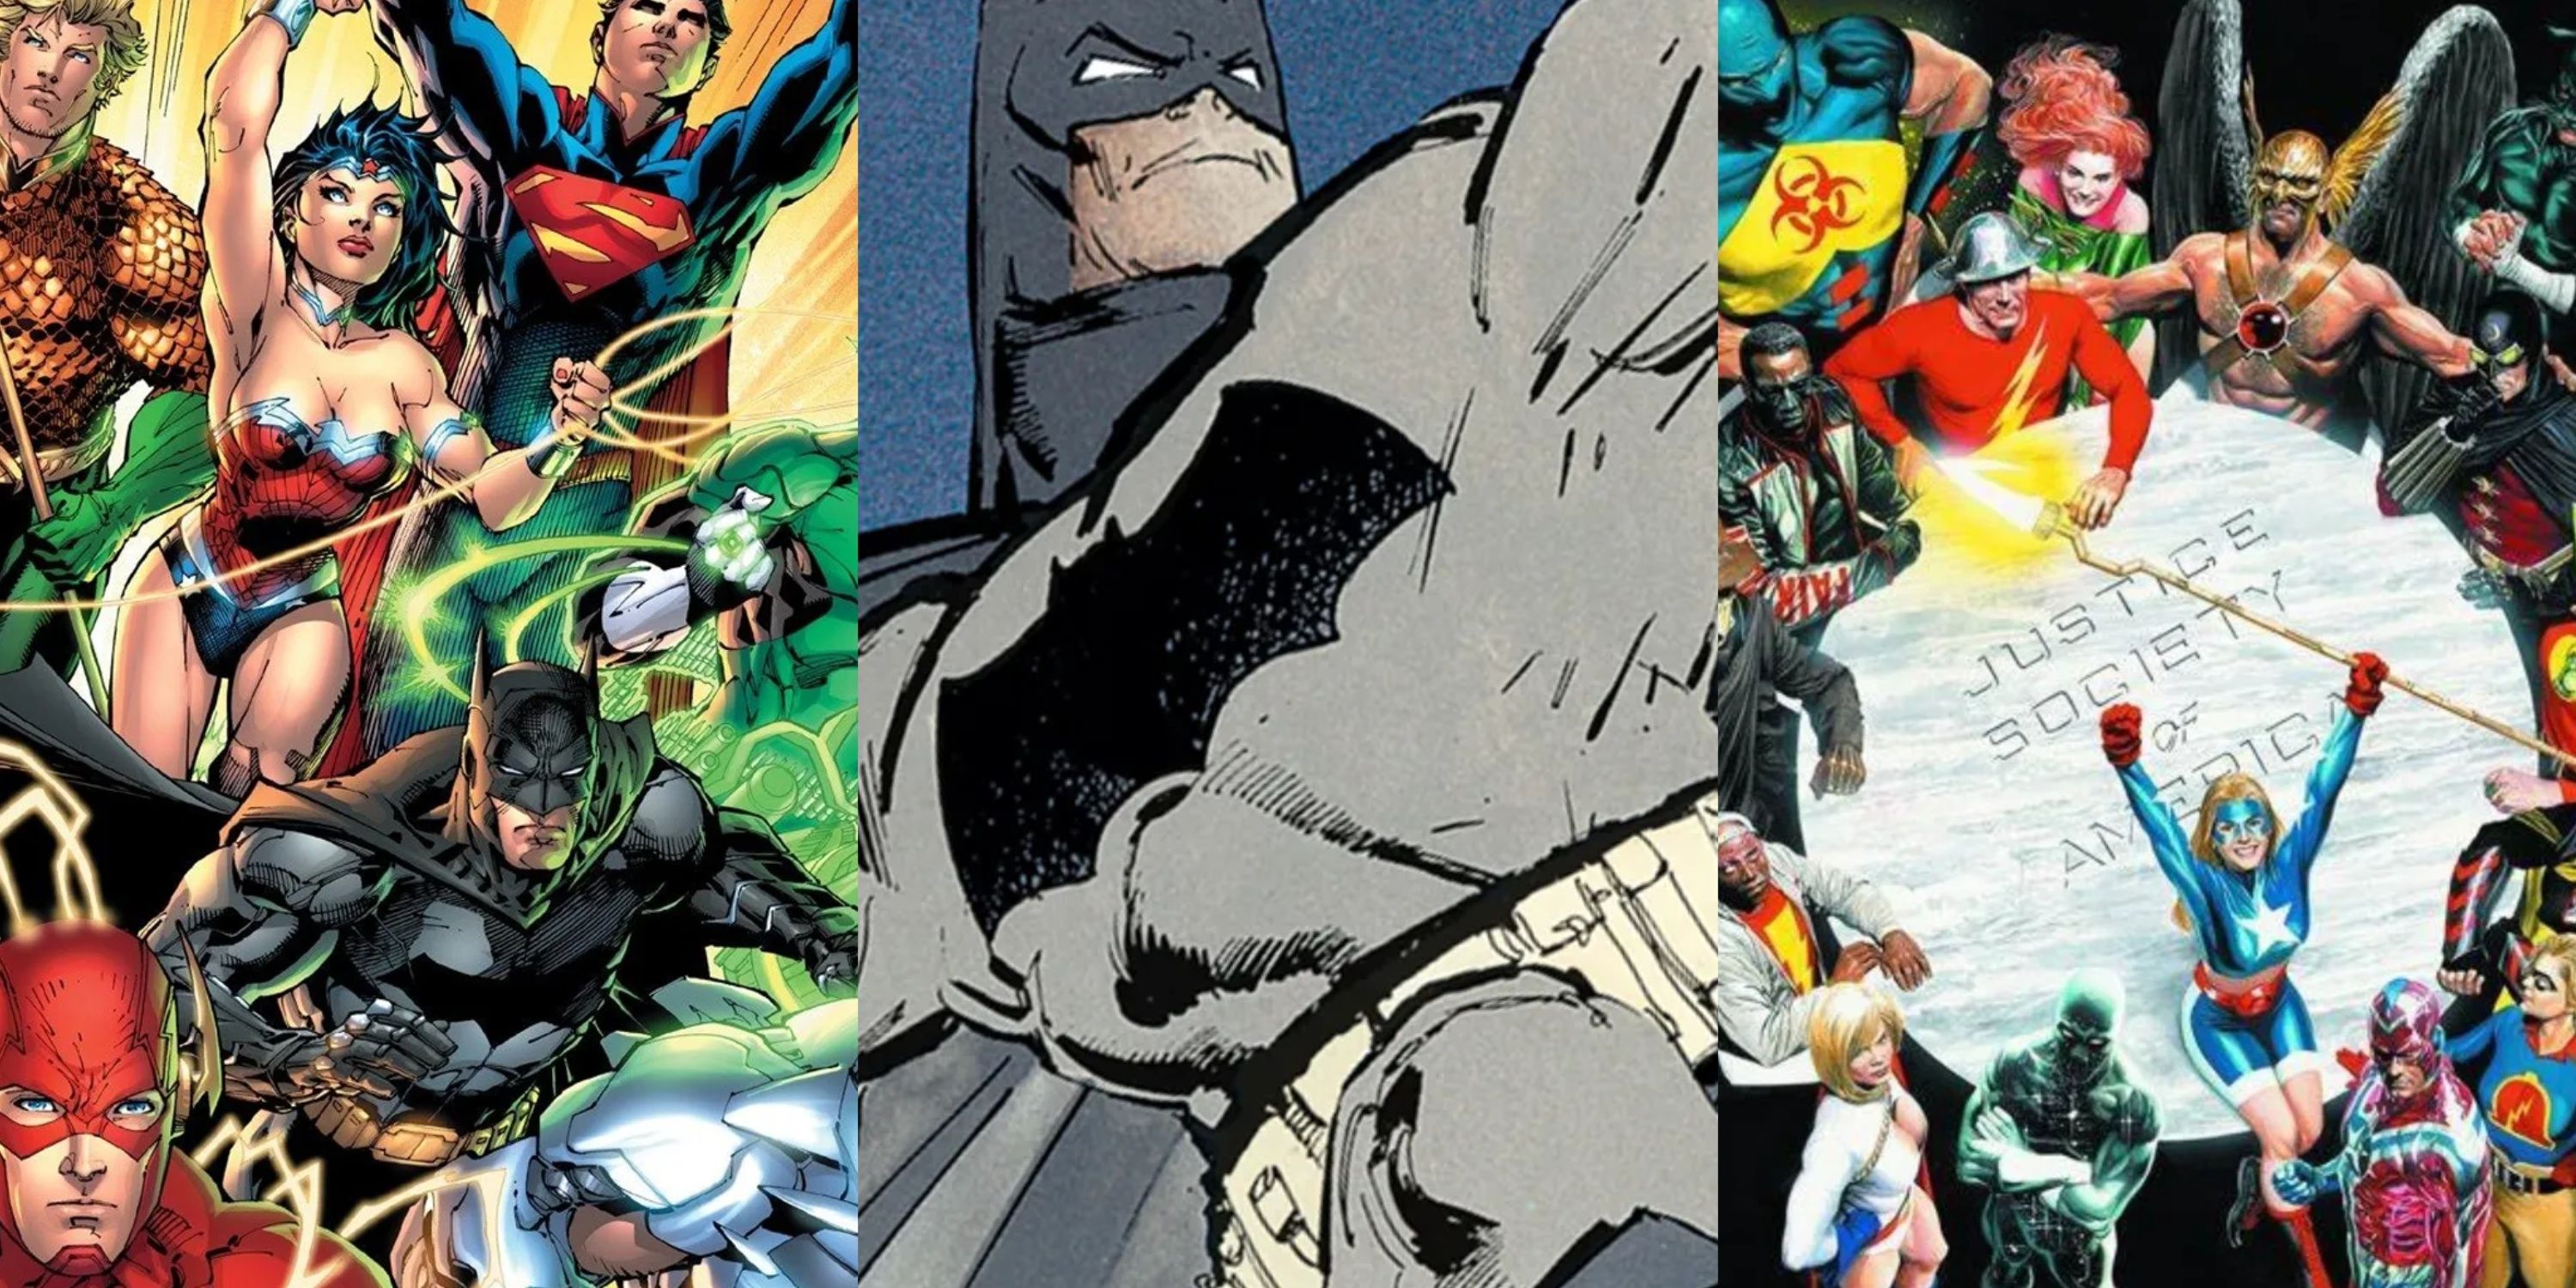 Split image New 52 Justice League, Dark Knight Returns, Justice Society of America